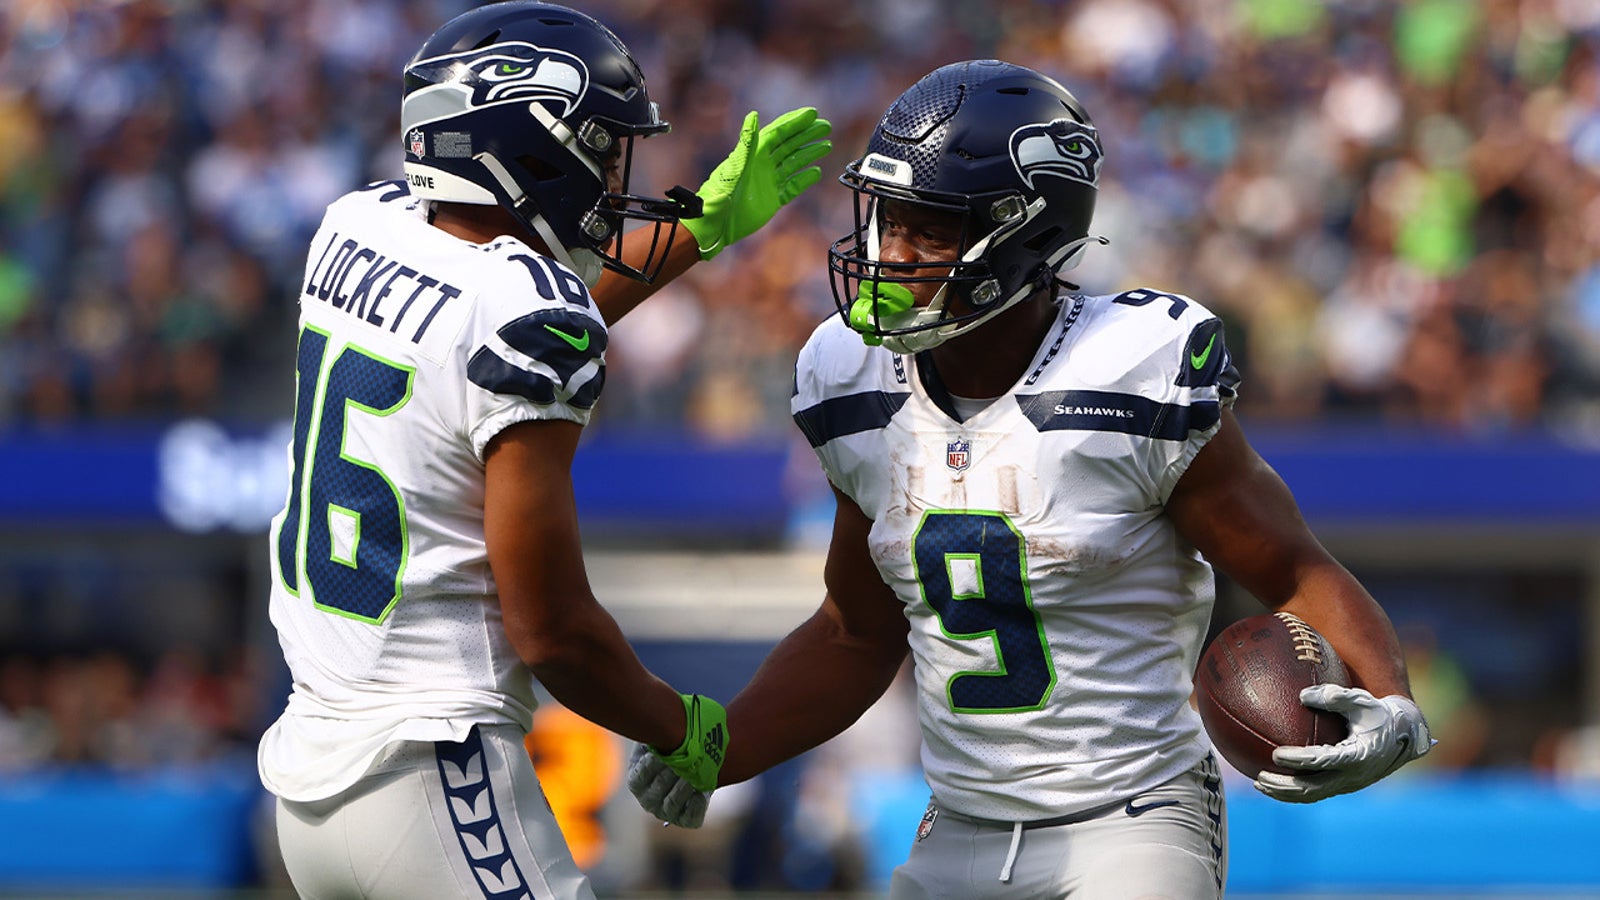 Seahawks' Kenneth Walker III runs all over the Chargers' defense in blowout victory